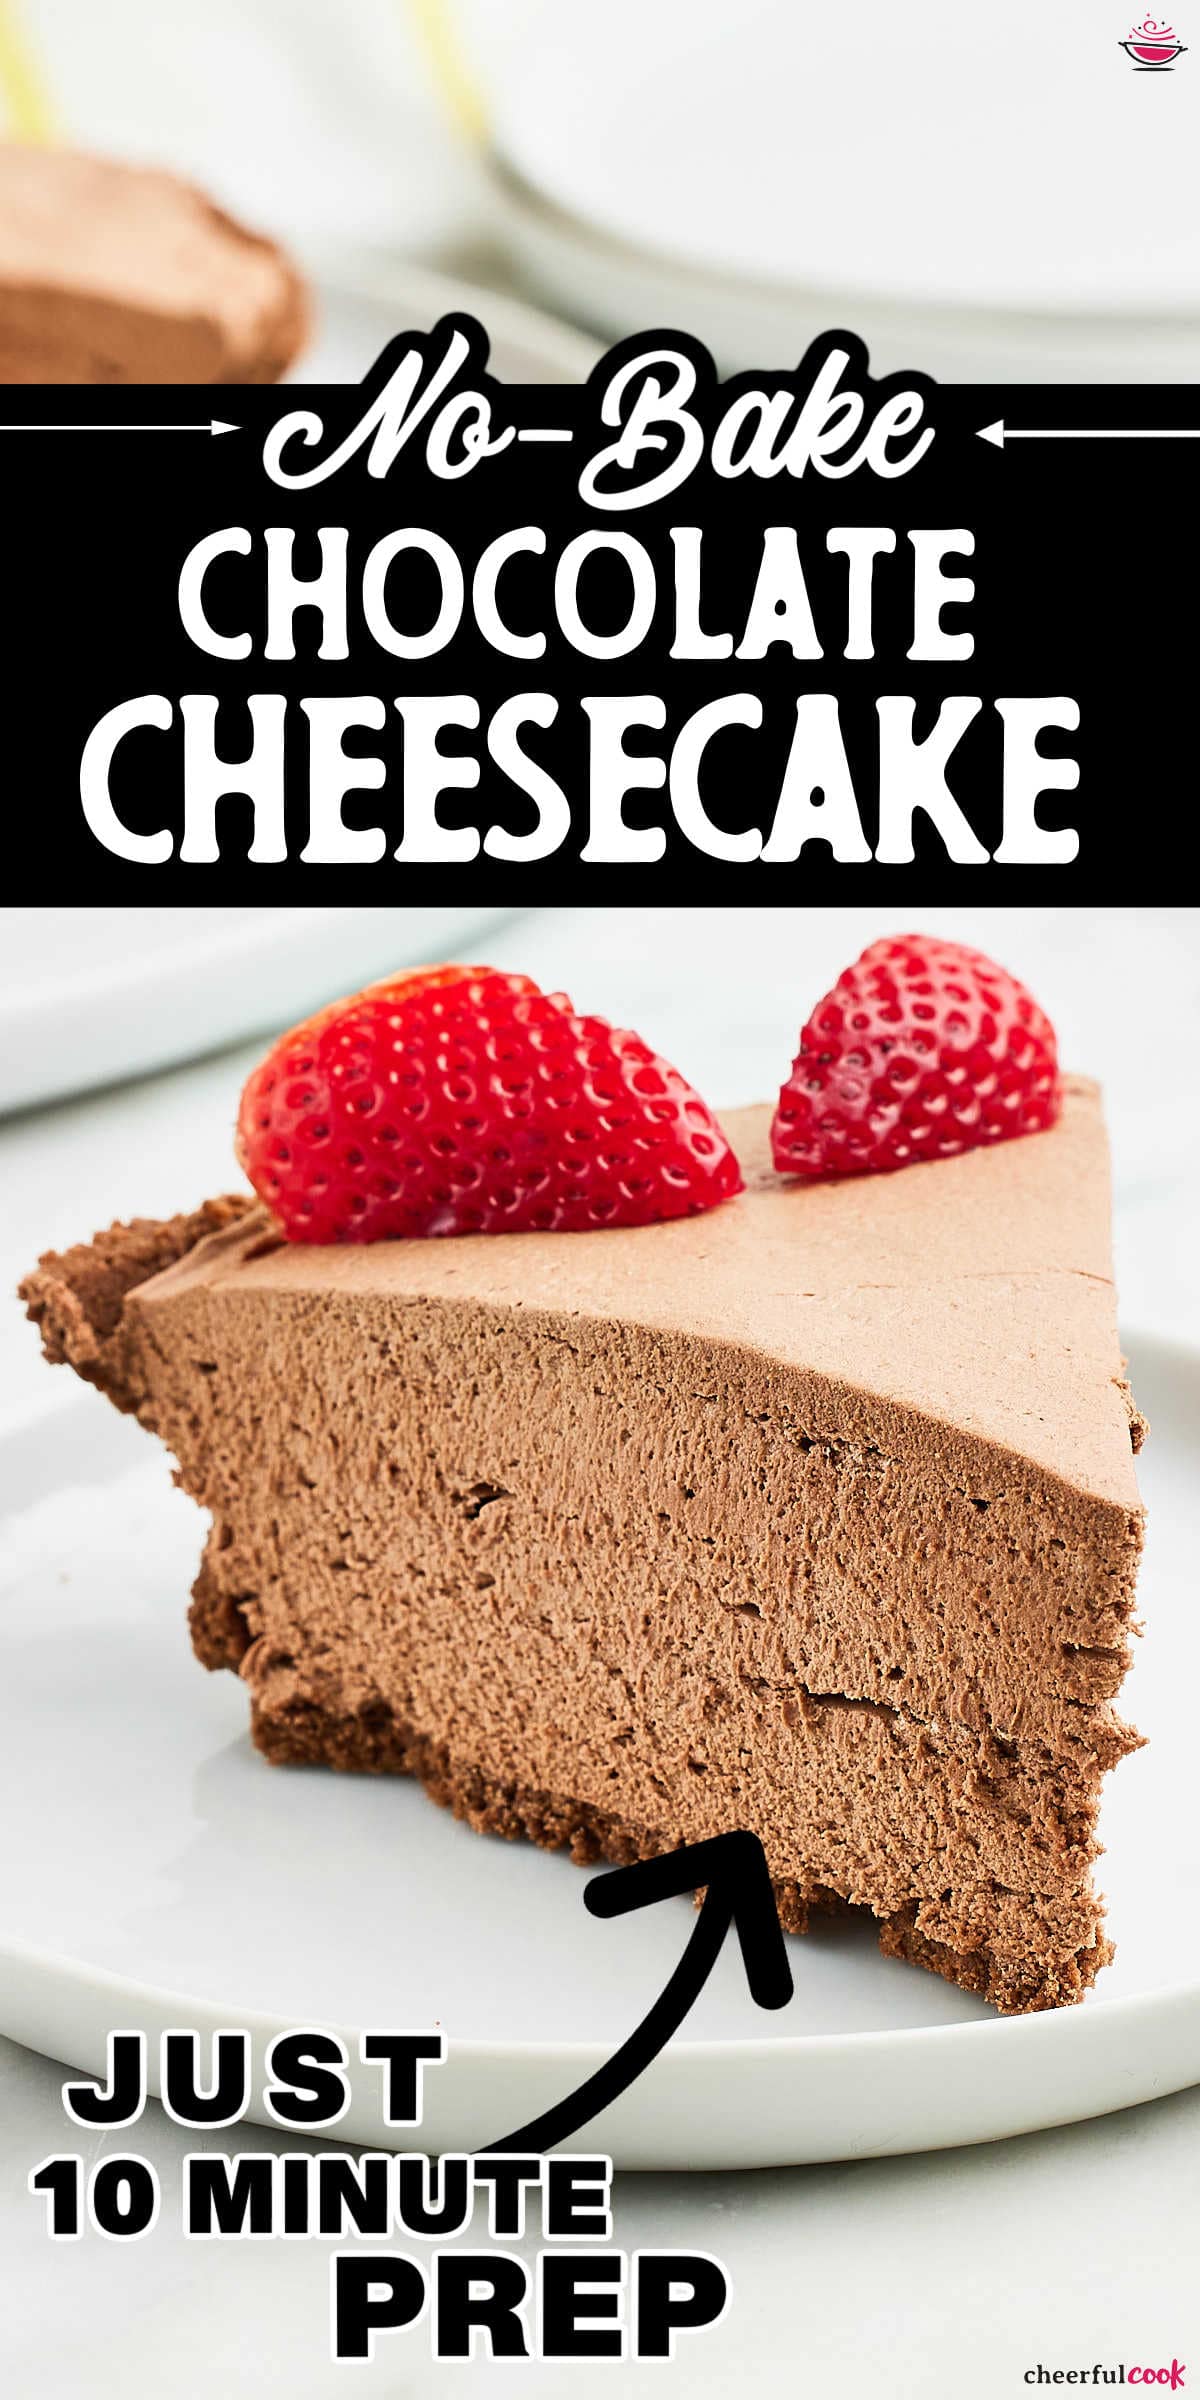 Looking for a scrumptious dessert that's simple to make and tastes amazing? Look no further than this no-bake chocolate cheesecake! No baking is necessary - it has a creamy chocolate filling and a yummy chocolate crust that make it perfect for any occasion. Even kids can help make it, so give it a try and see how delicious it is! #cheerfulcook #nobakecheesecake #chocolatecheesecake #easydessert #cheesecakelover #easyrecipes via @cheerfulcook